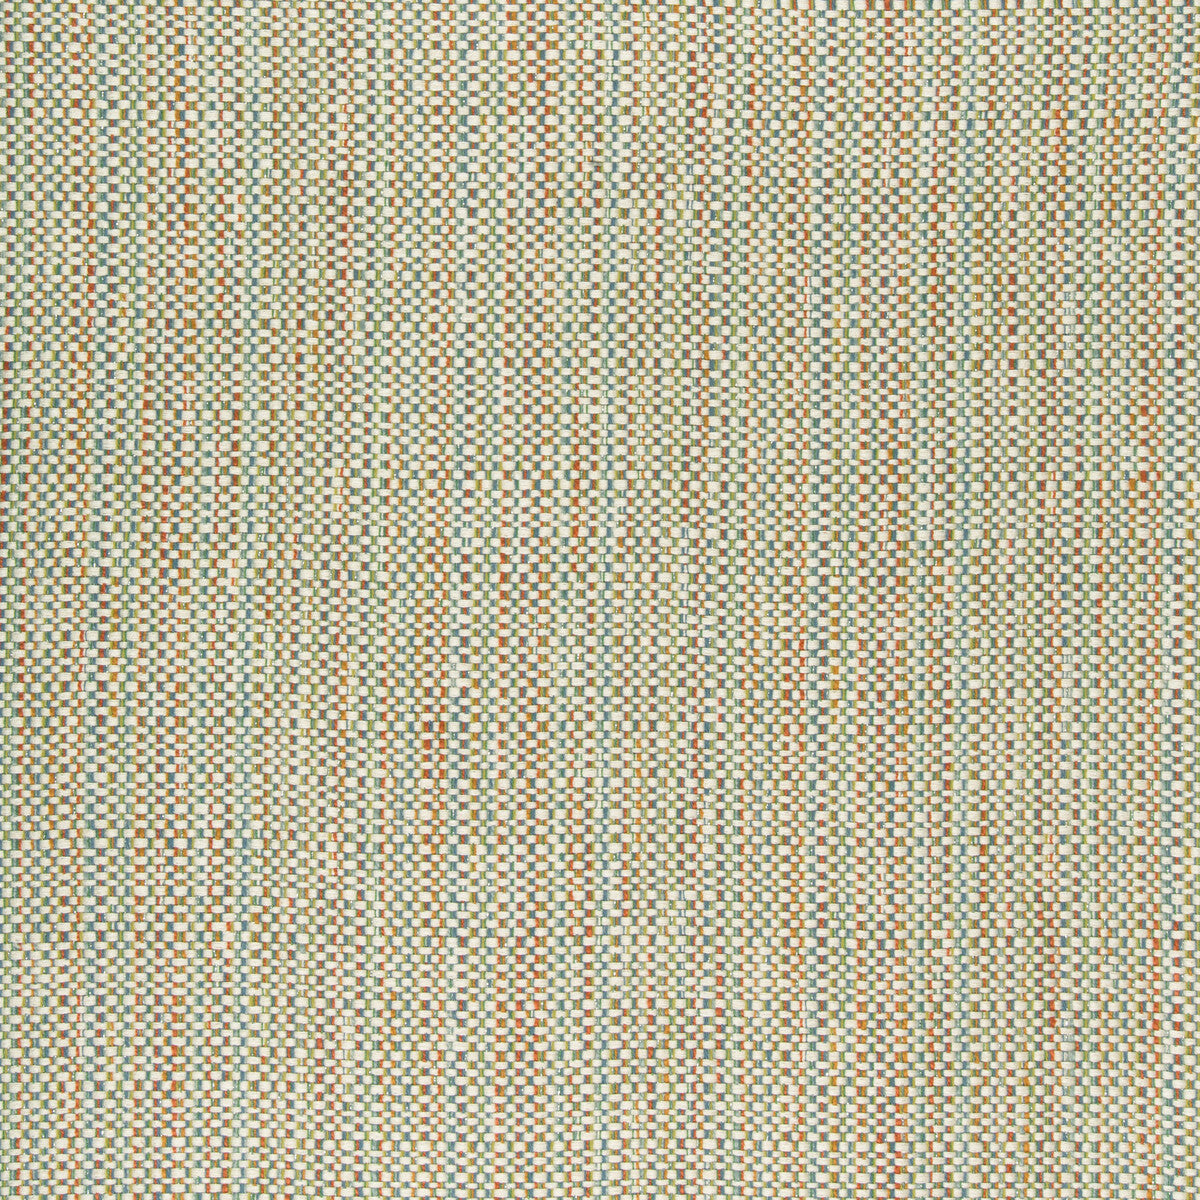 Kravet Contract fabric in 34746-312 color - pattern 34746.312.0 - by Kravet Contract in the Incase Crypton Gis collection